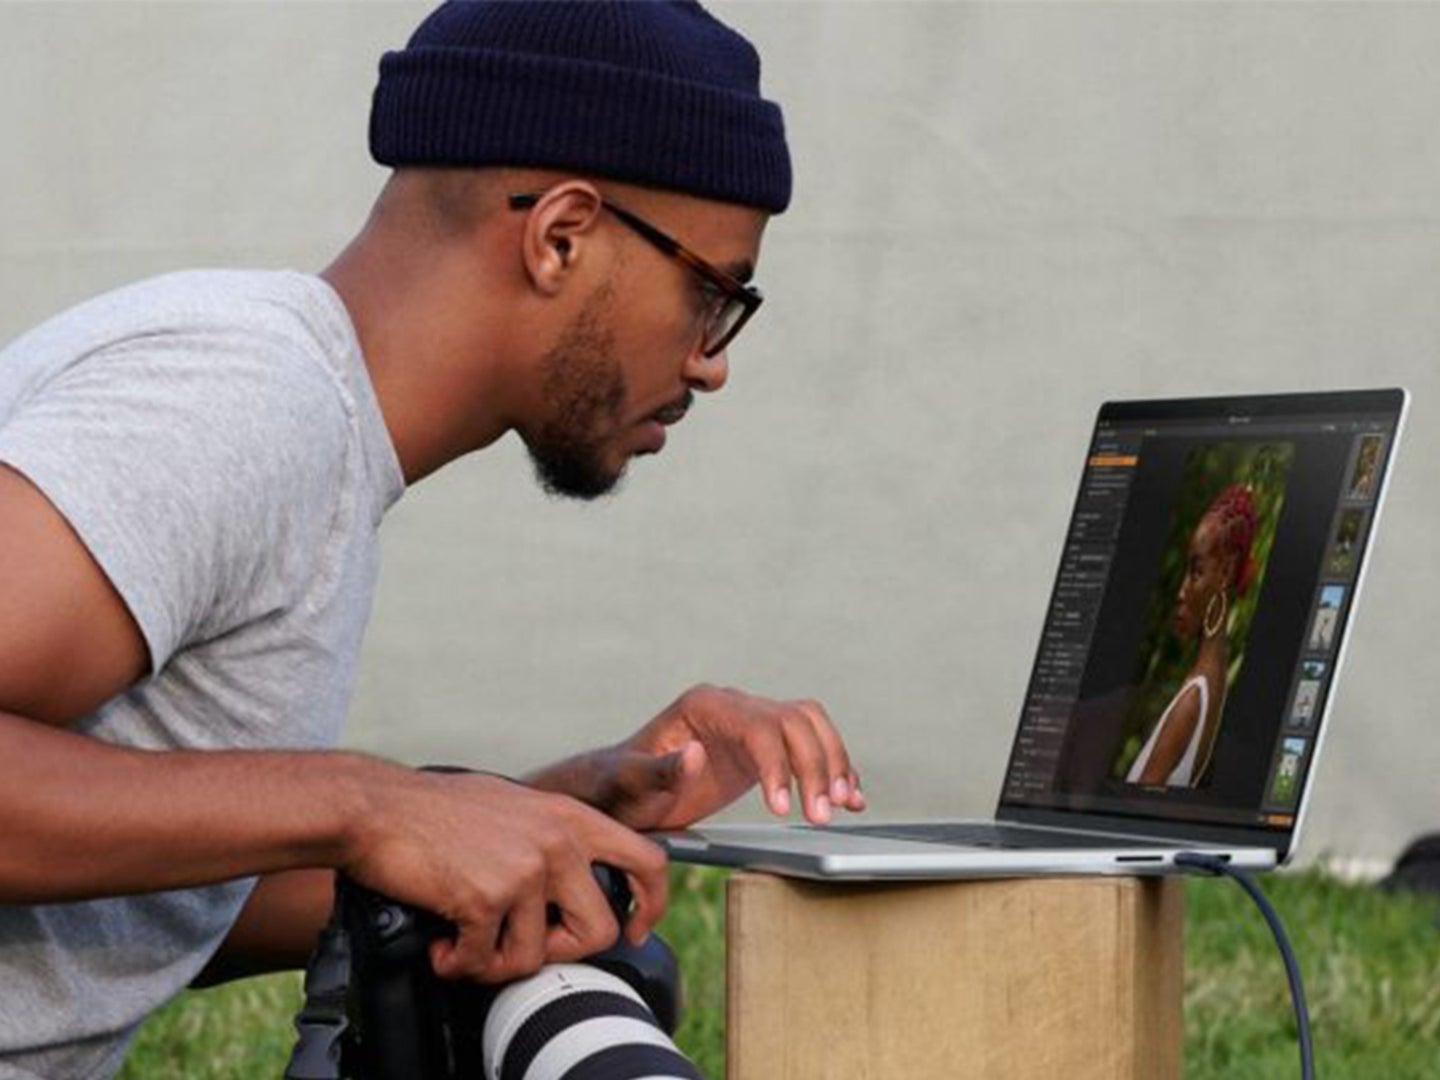 A person using a Macbook to edit a photo.